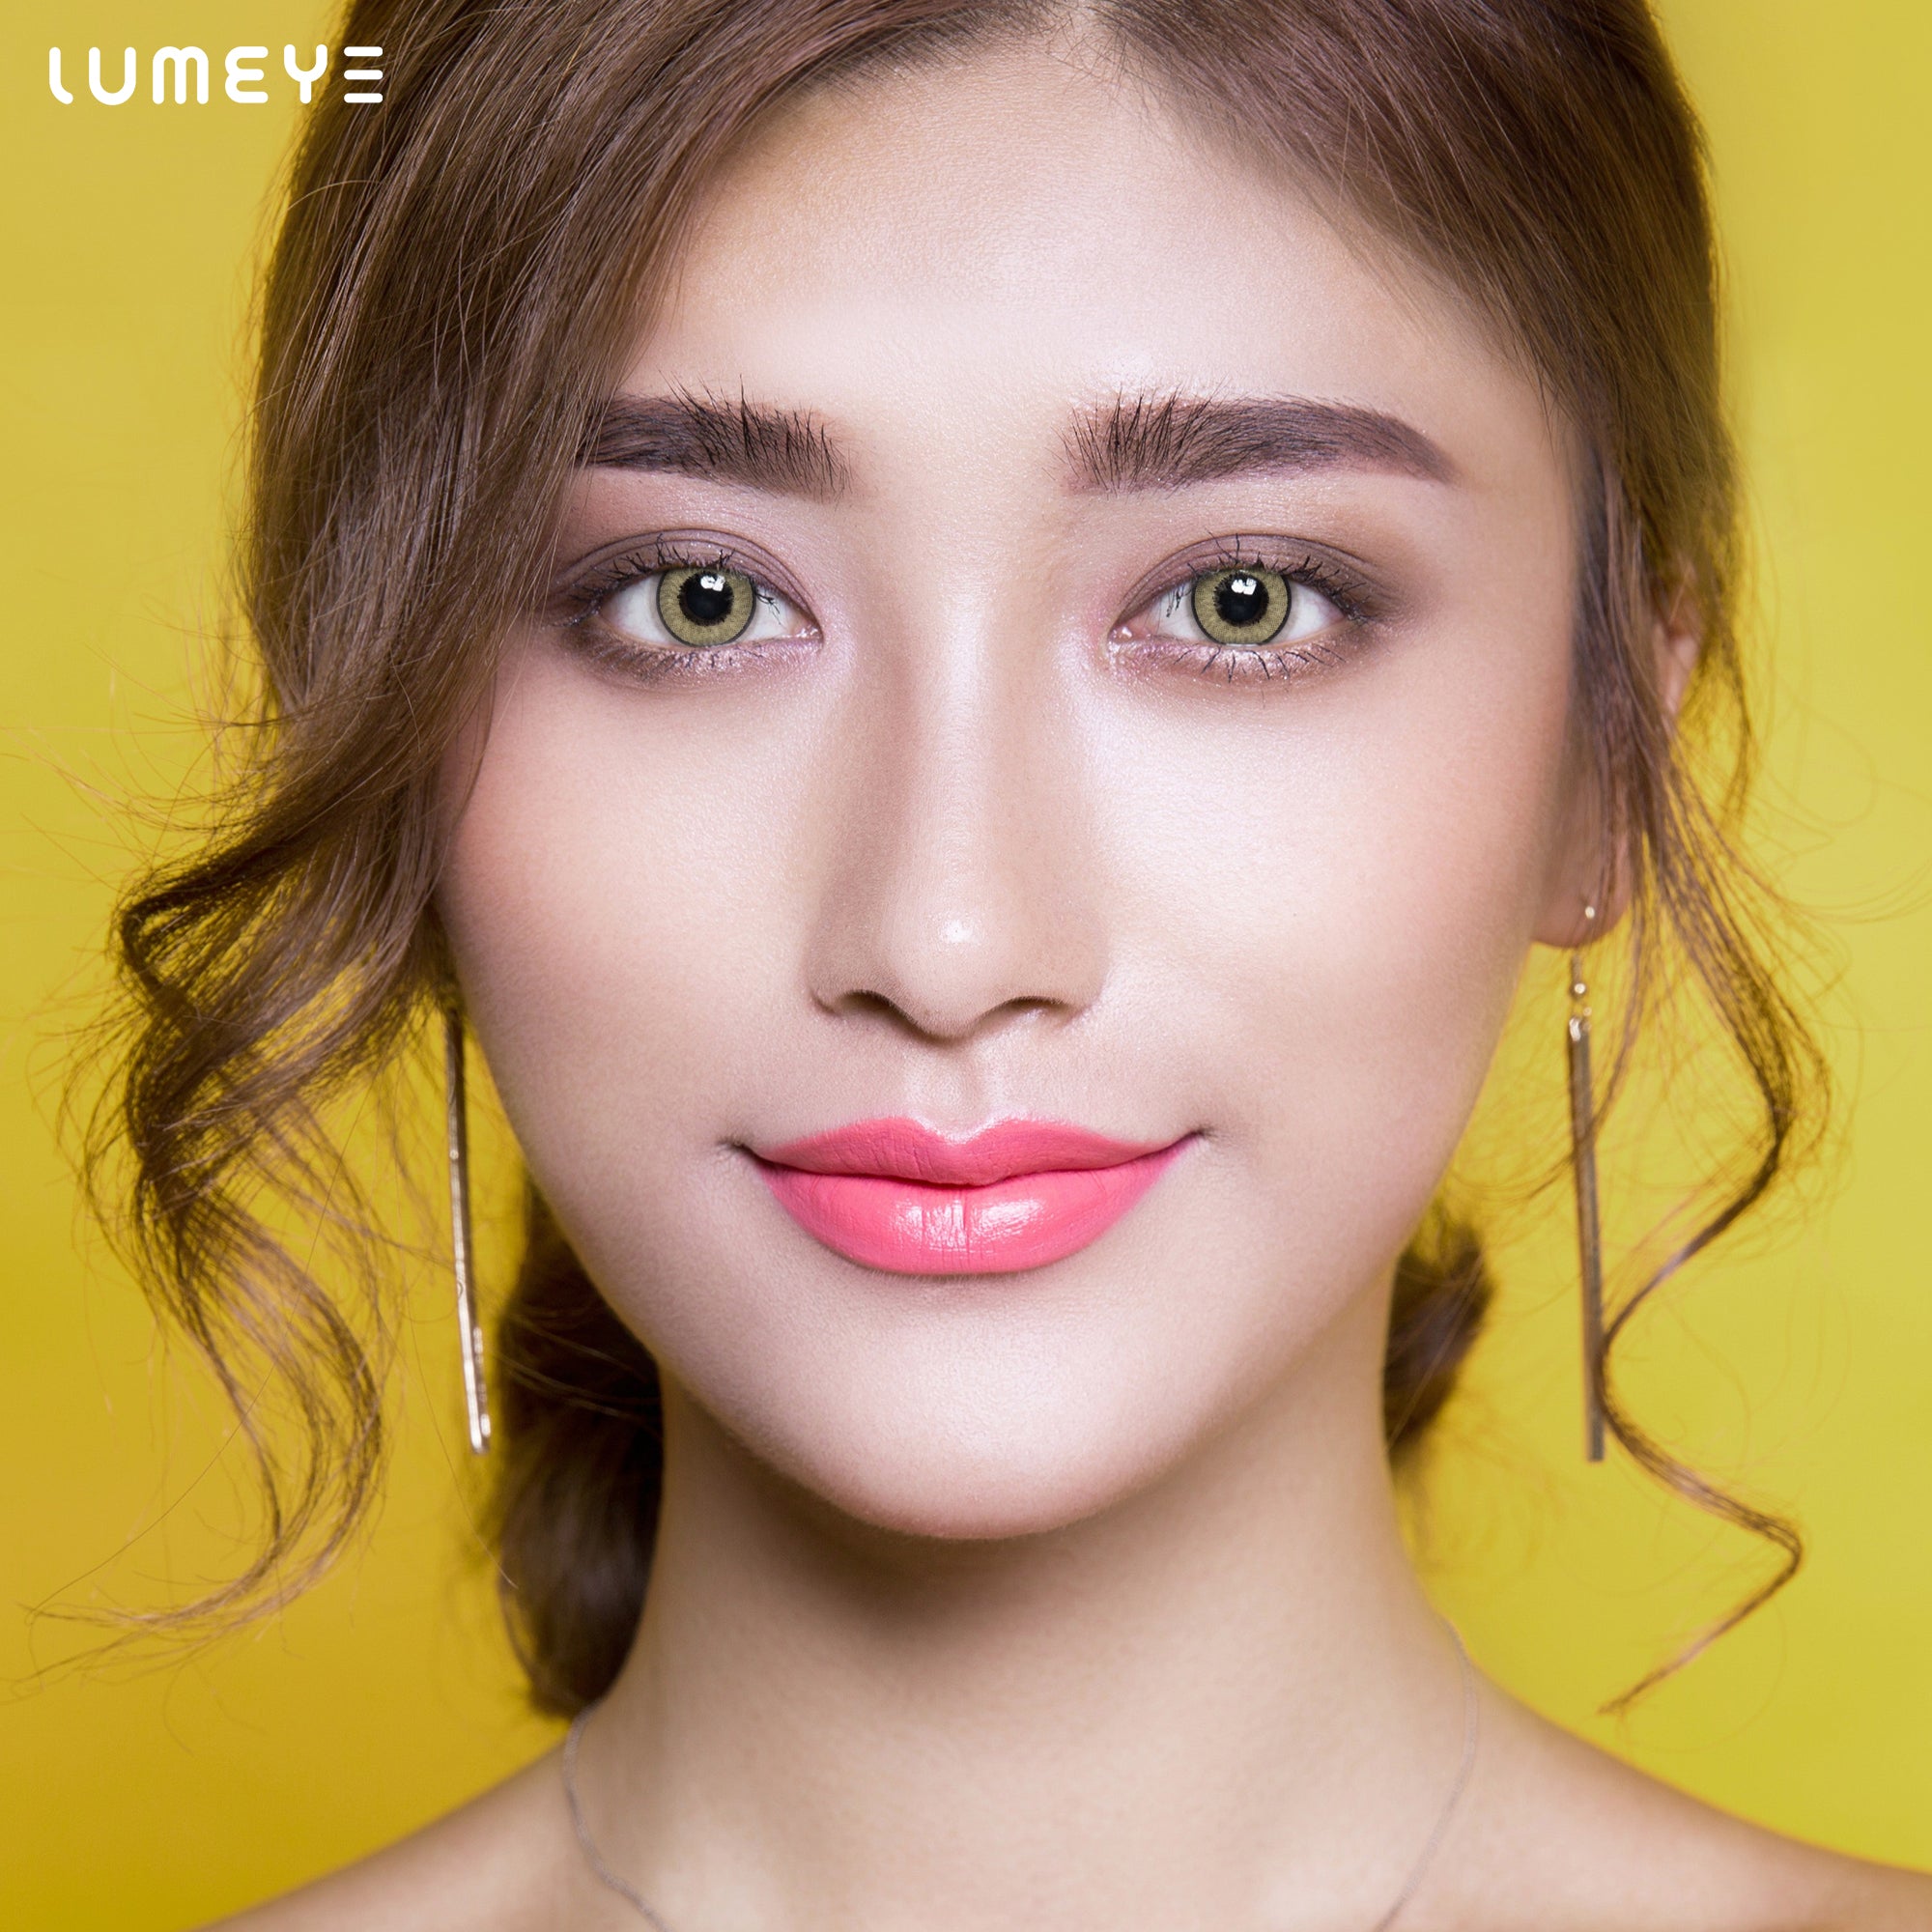 Best COLORED CONTACTS - LUMEYE Magic Brown Colored Contact Lenses - LUMEYE